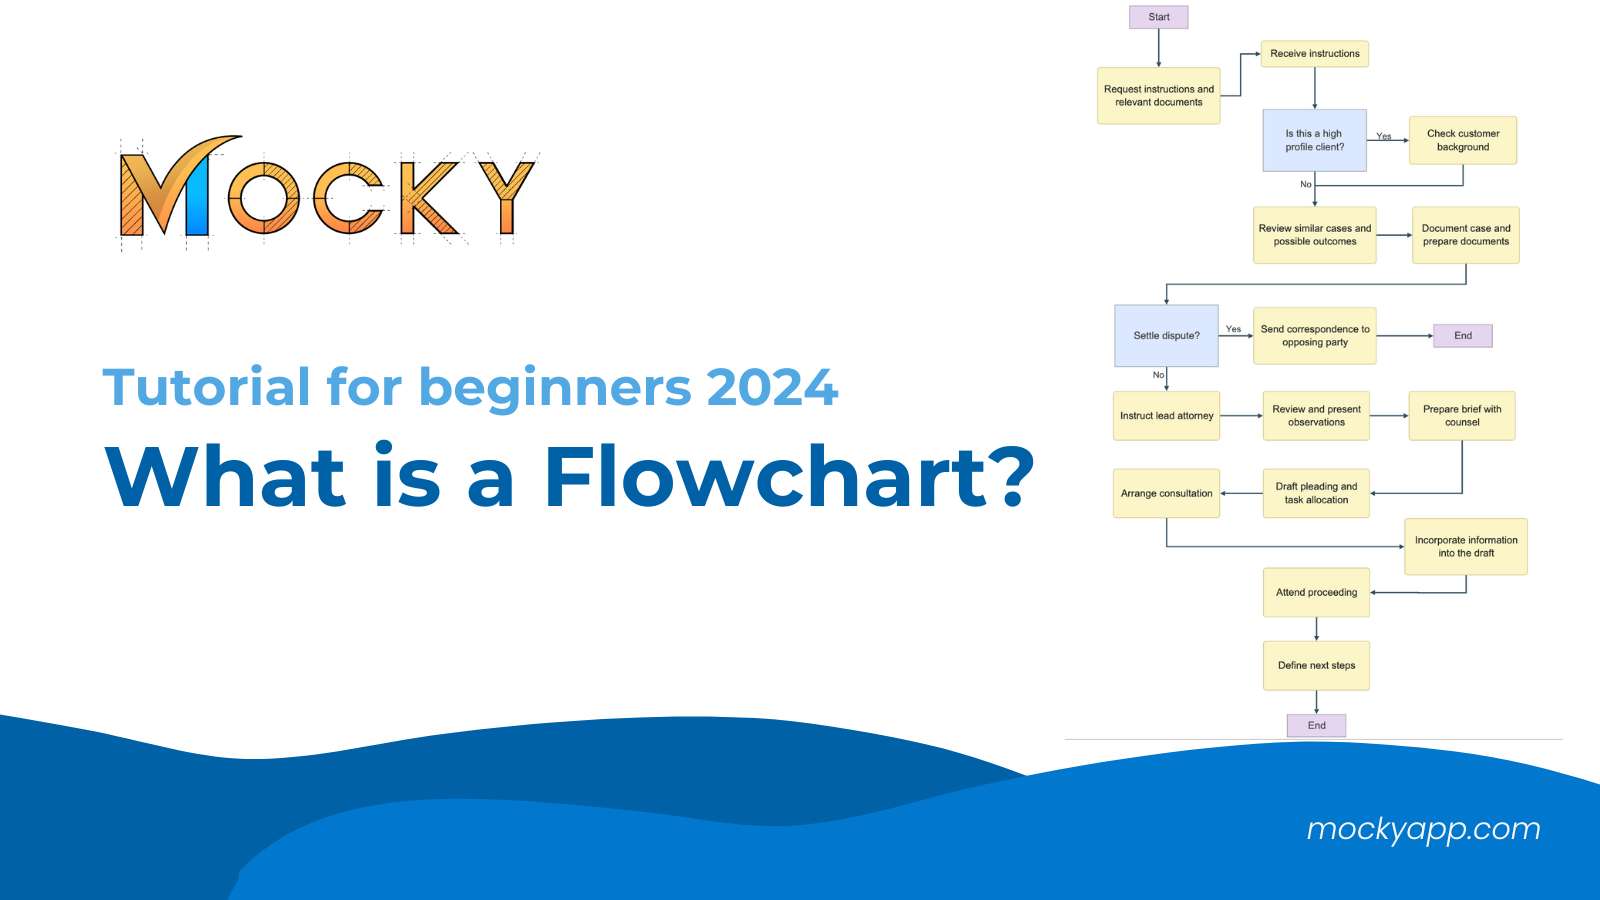 What is a Flowchart